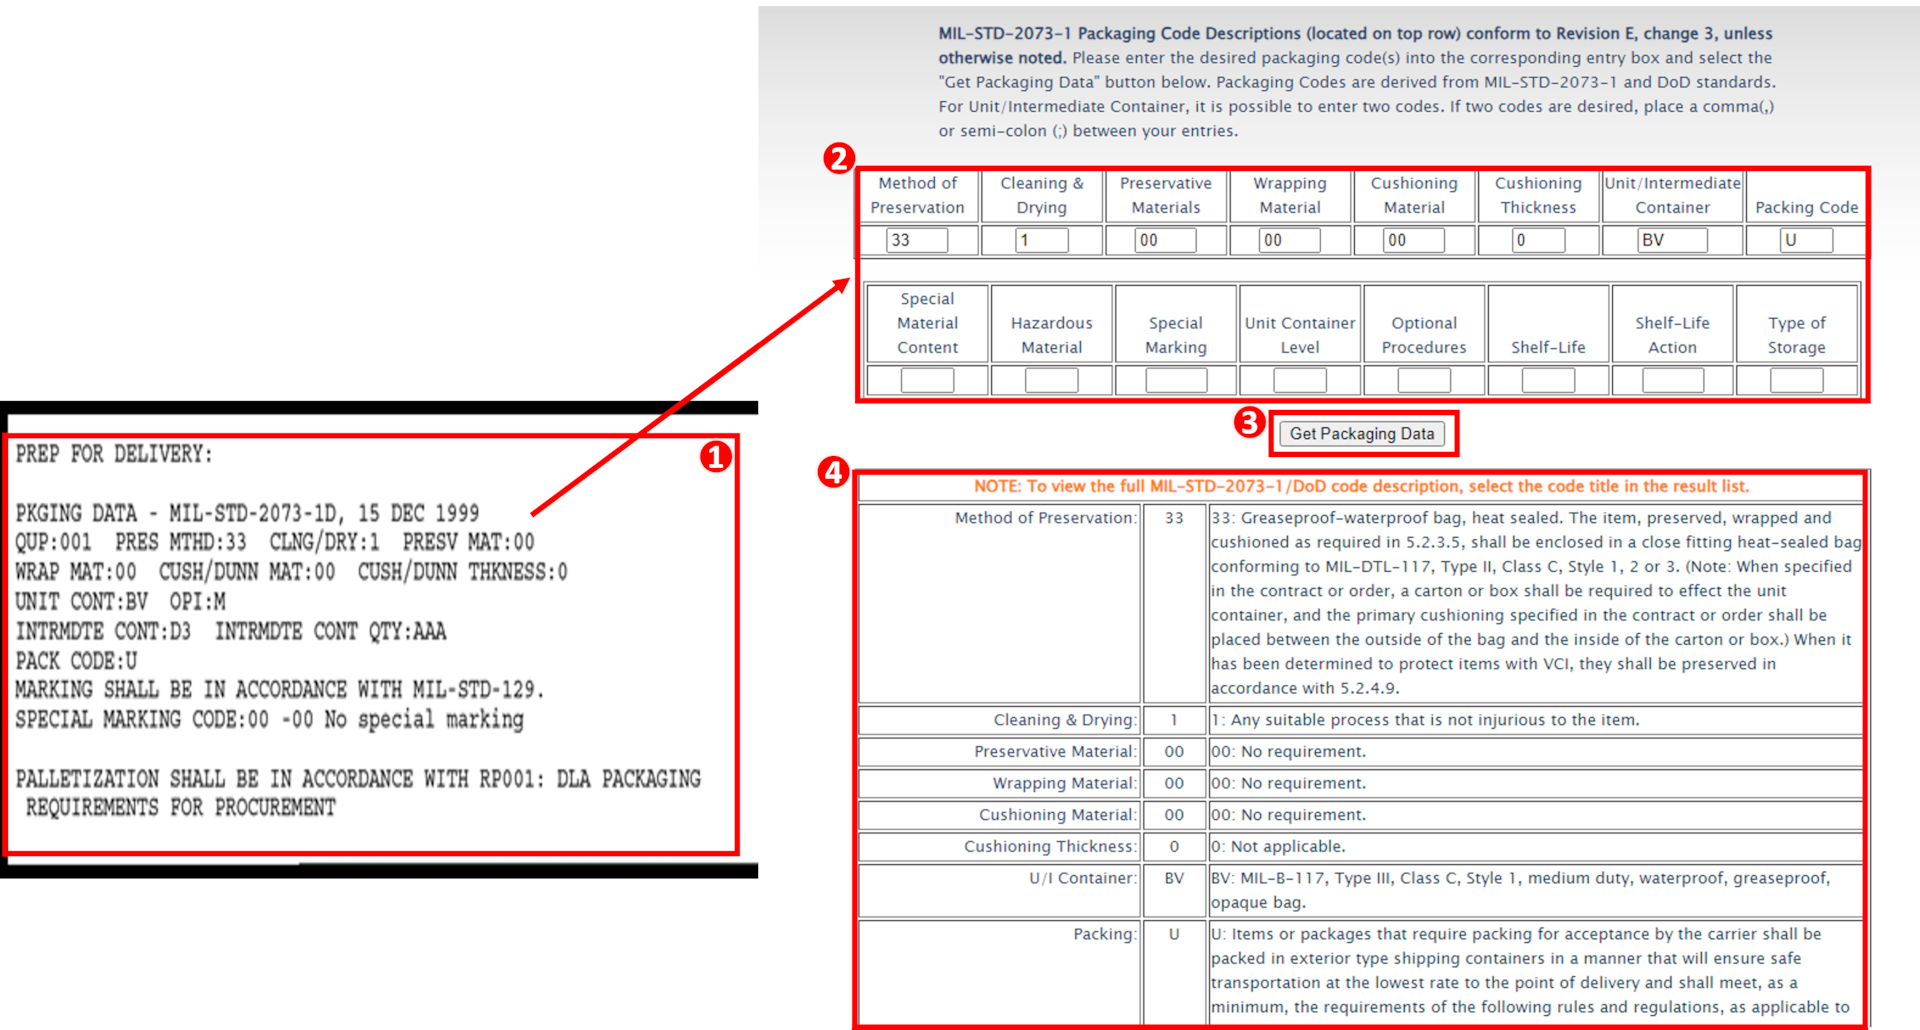 Graphic demonstrating inserting packaging codes from contract/solicitation into the packaging code lookup tool, submitting the codes and reviewing information related to each code.